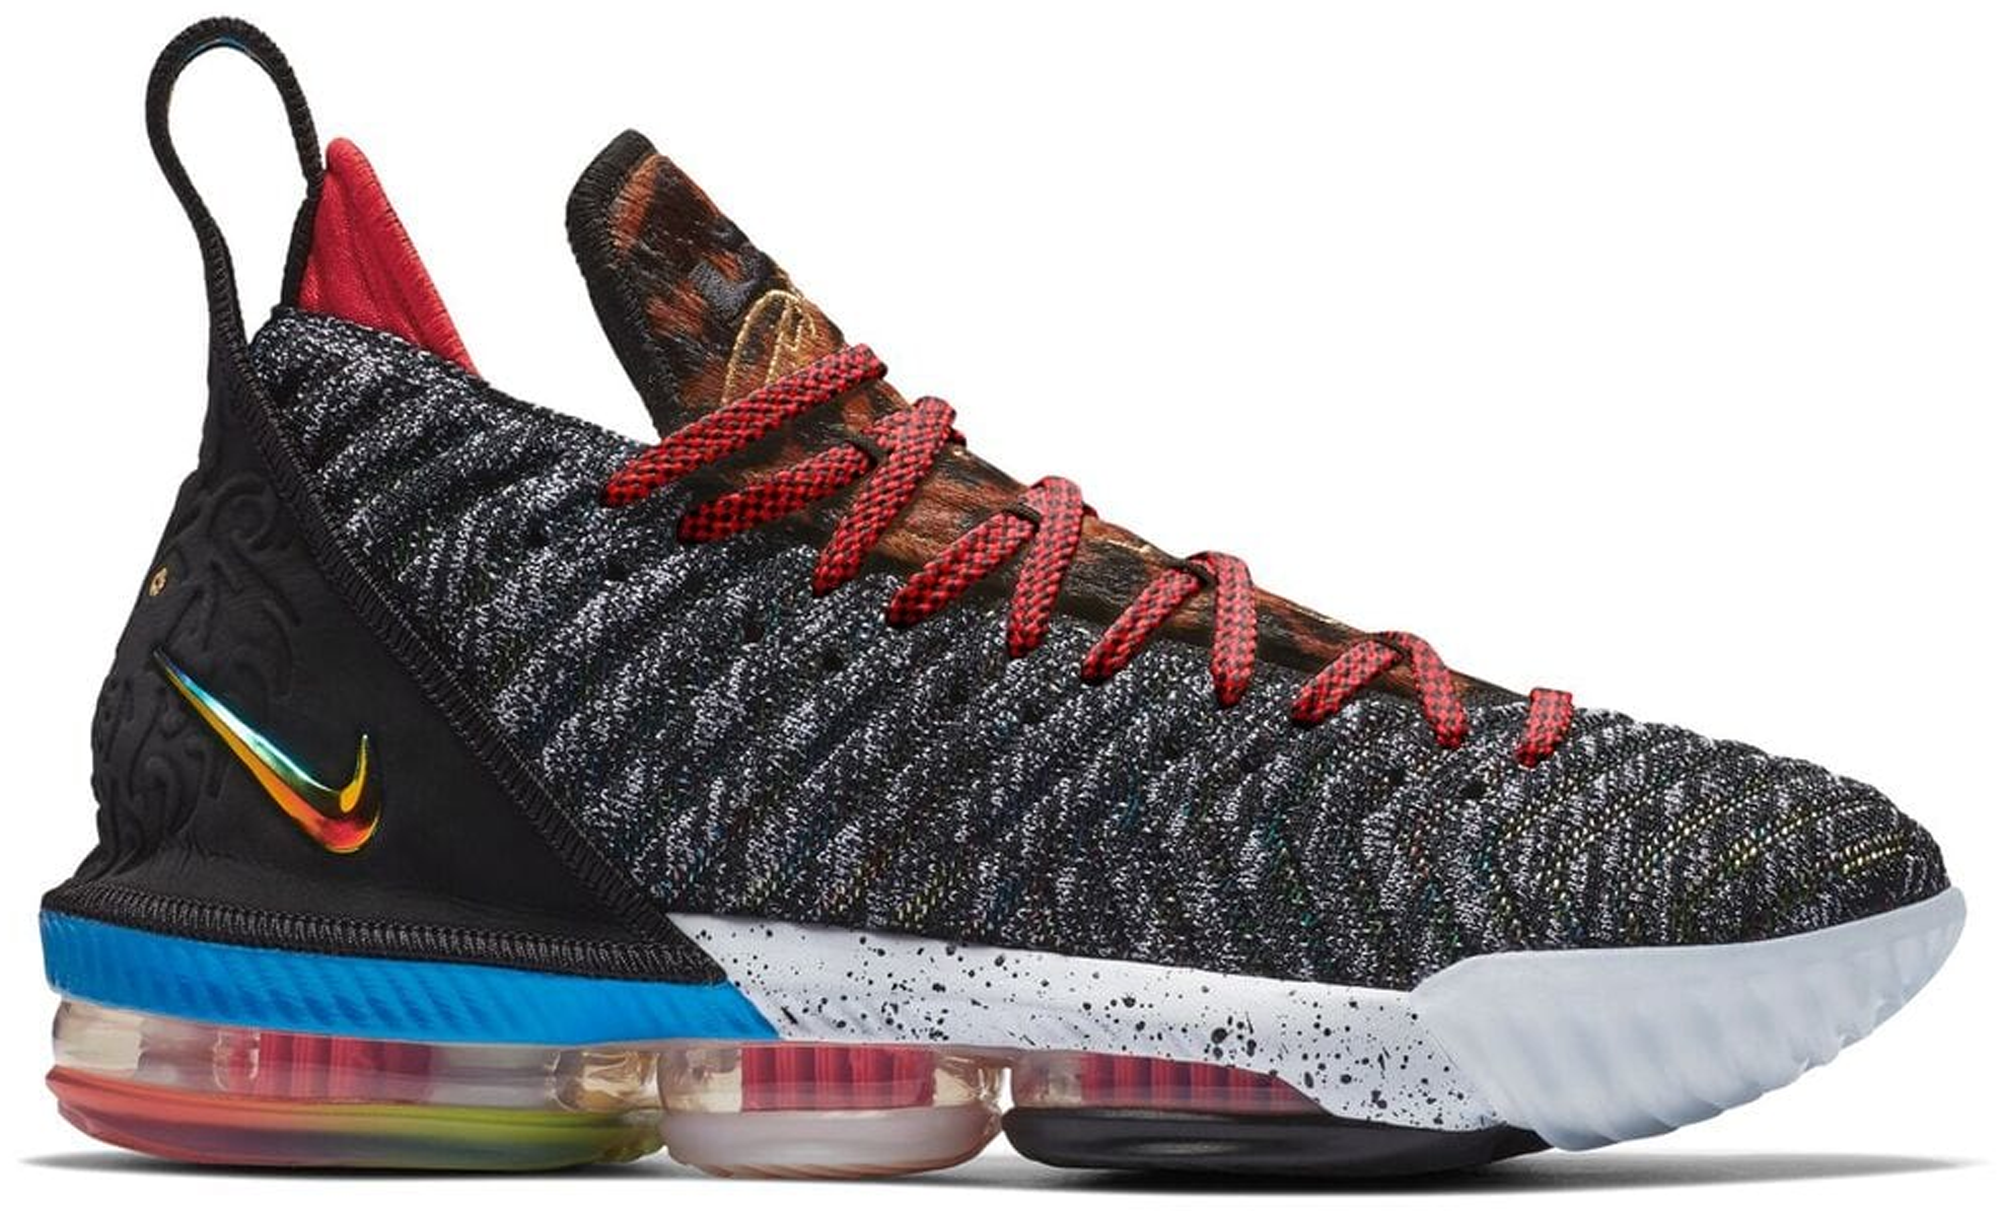 images of lebron 16